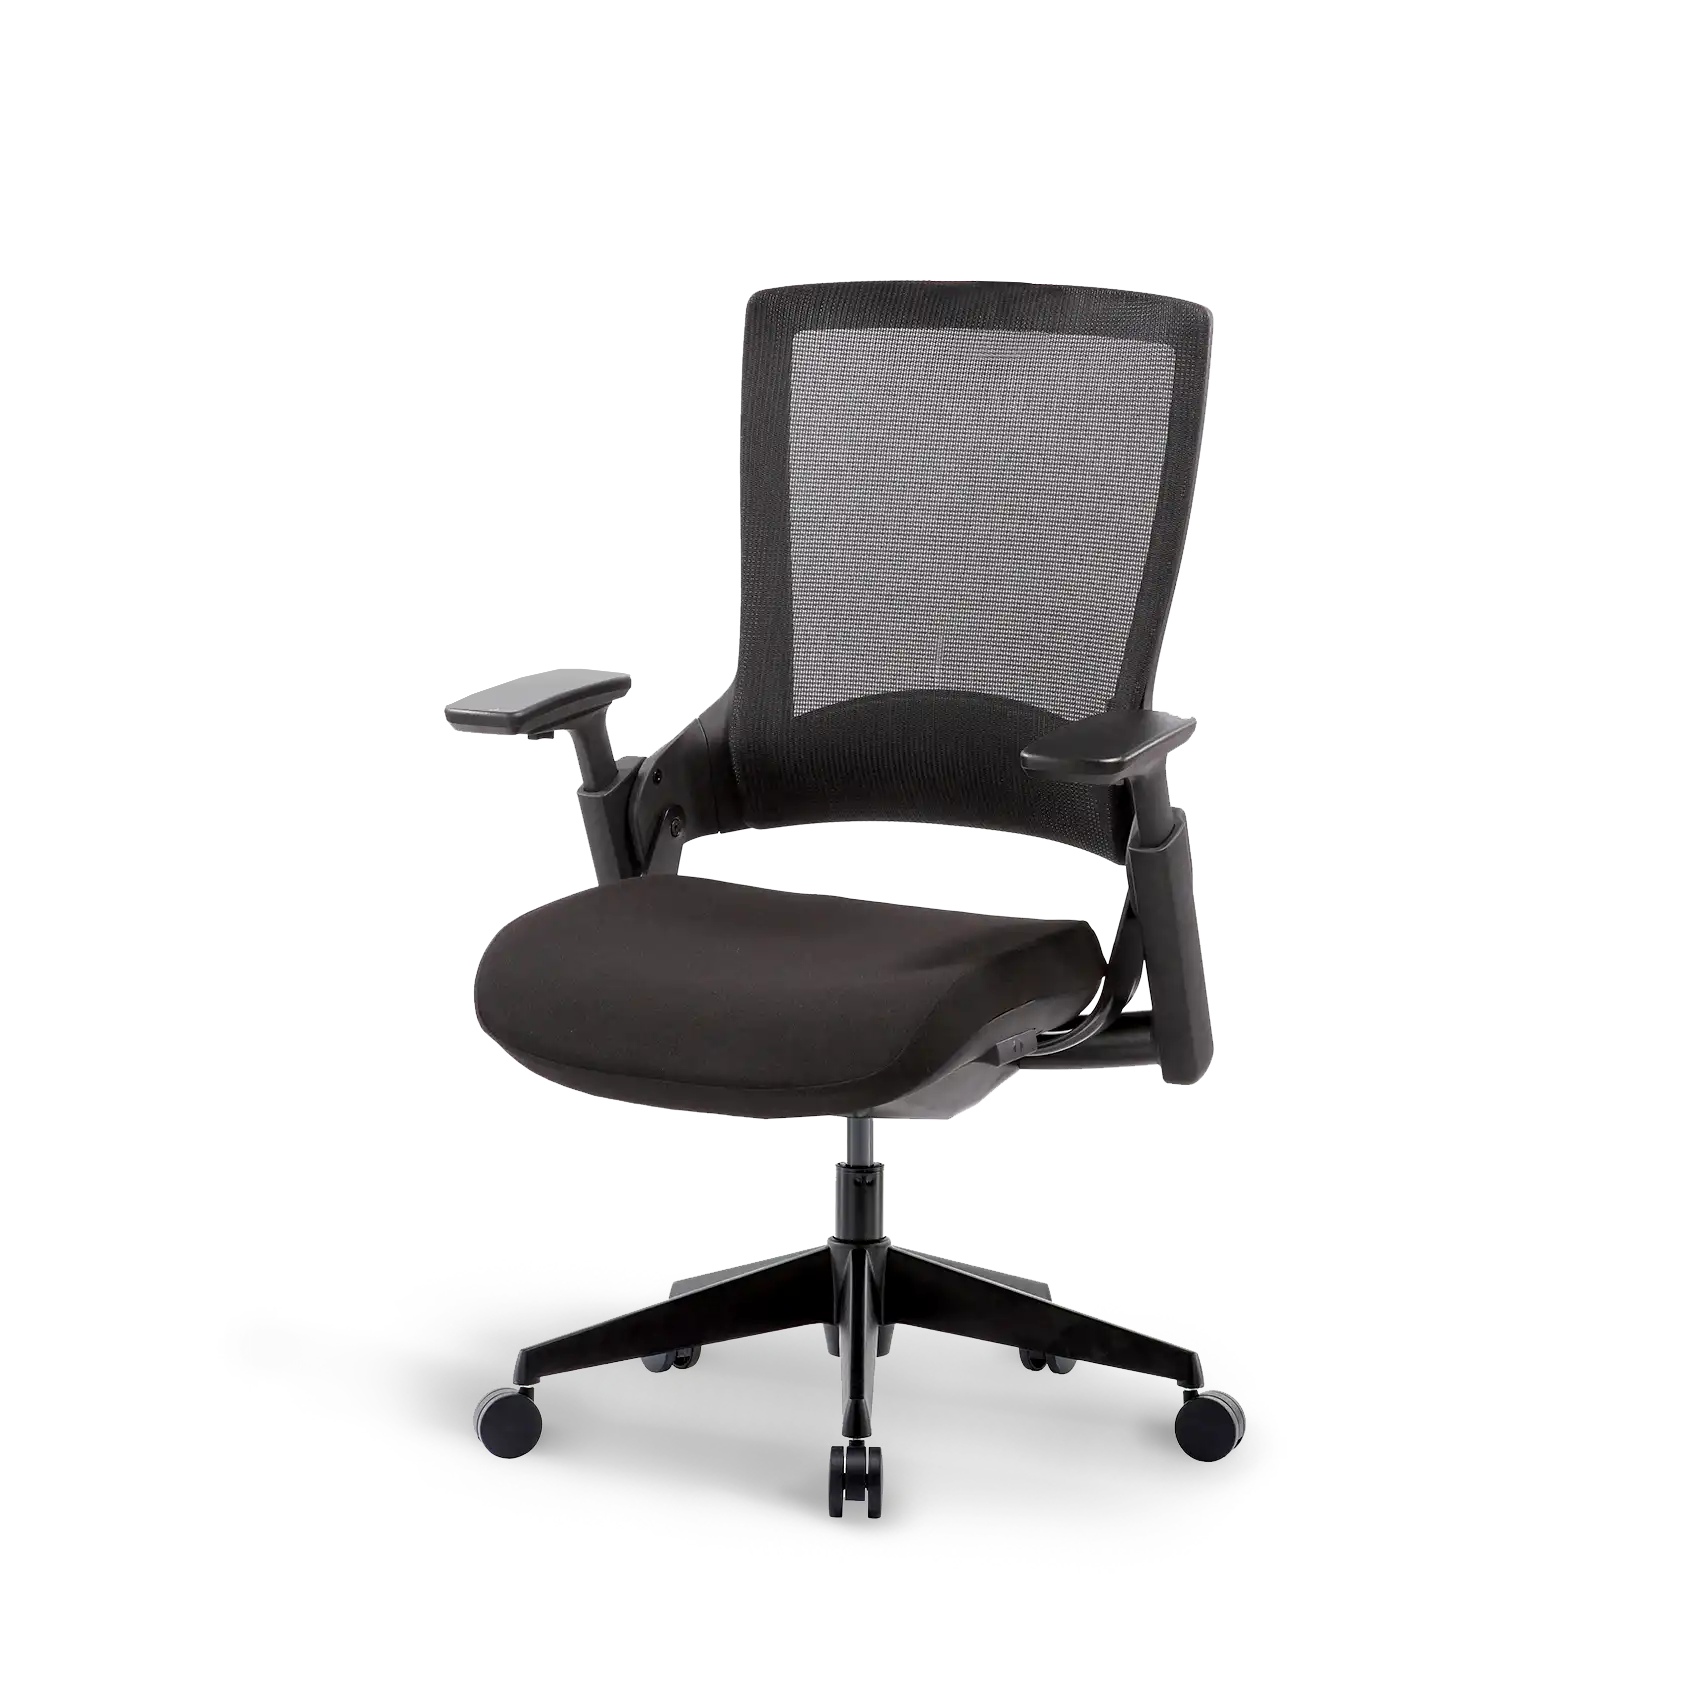 Flujo Angulo ergonomic office chair in black with adjustable armrests